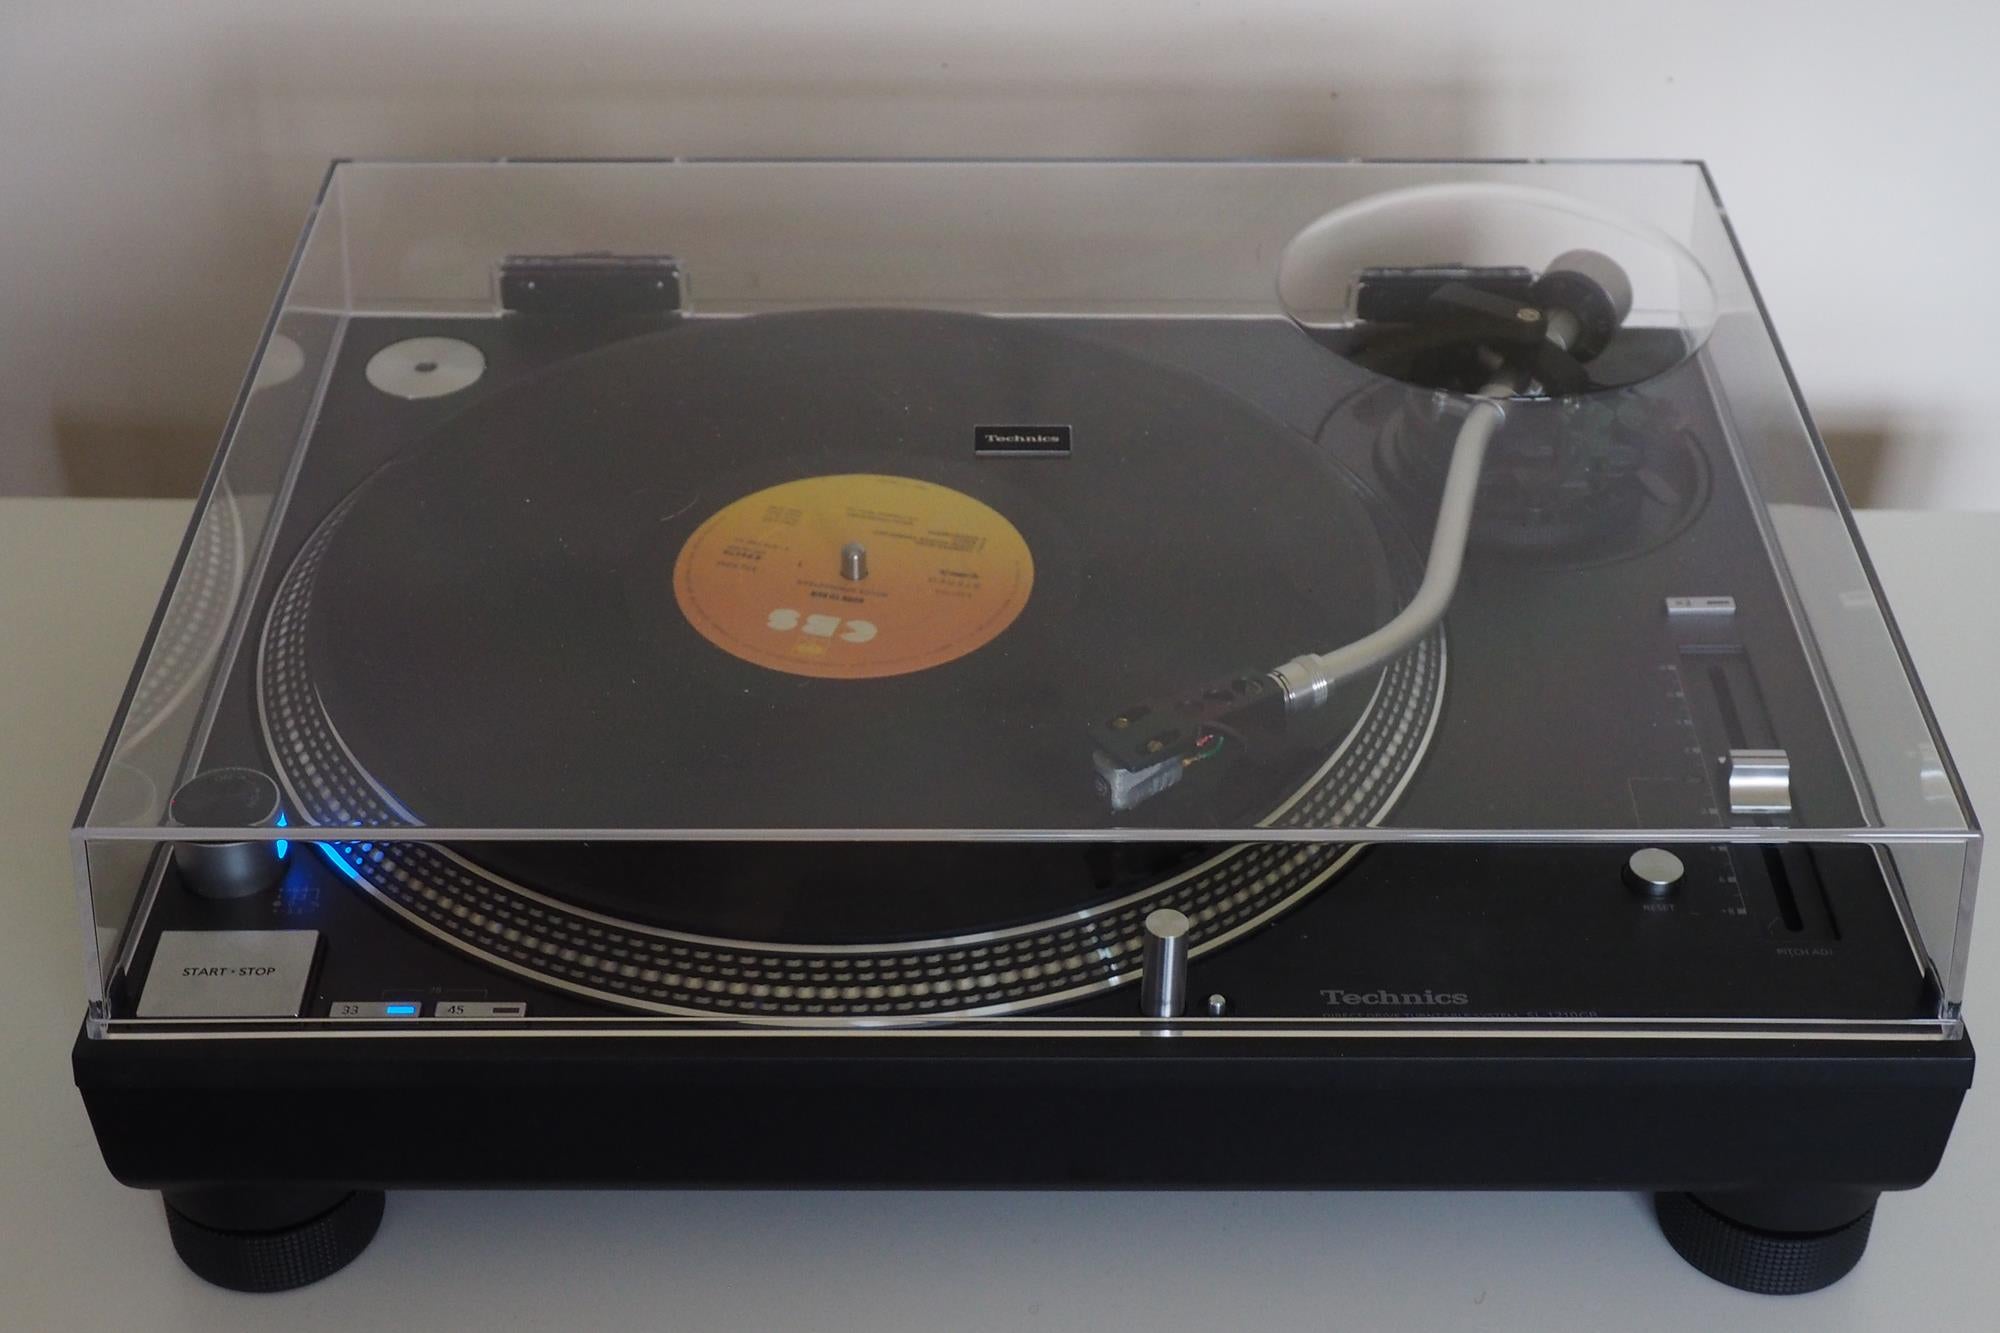 Technics SL-1200GR turntable with vinyl record playing.